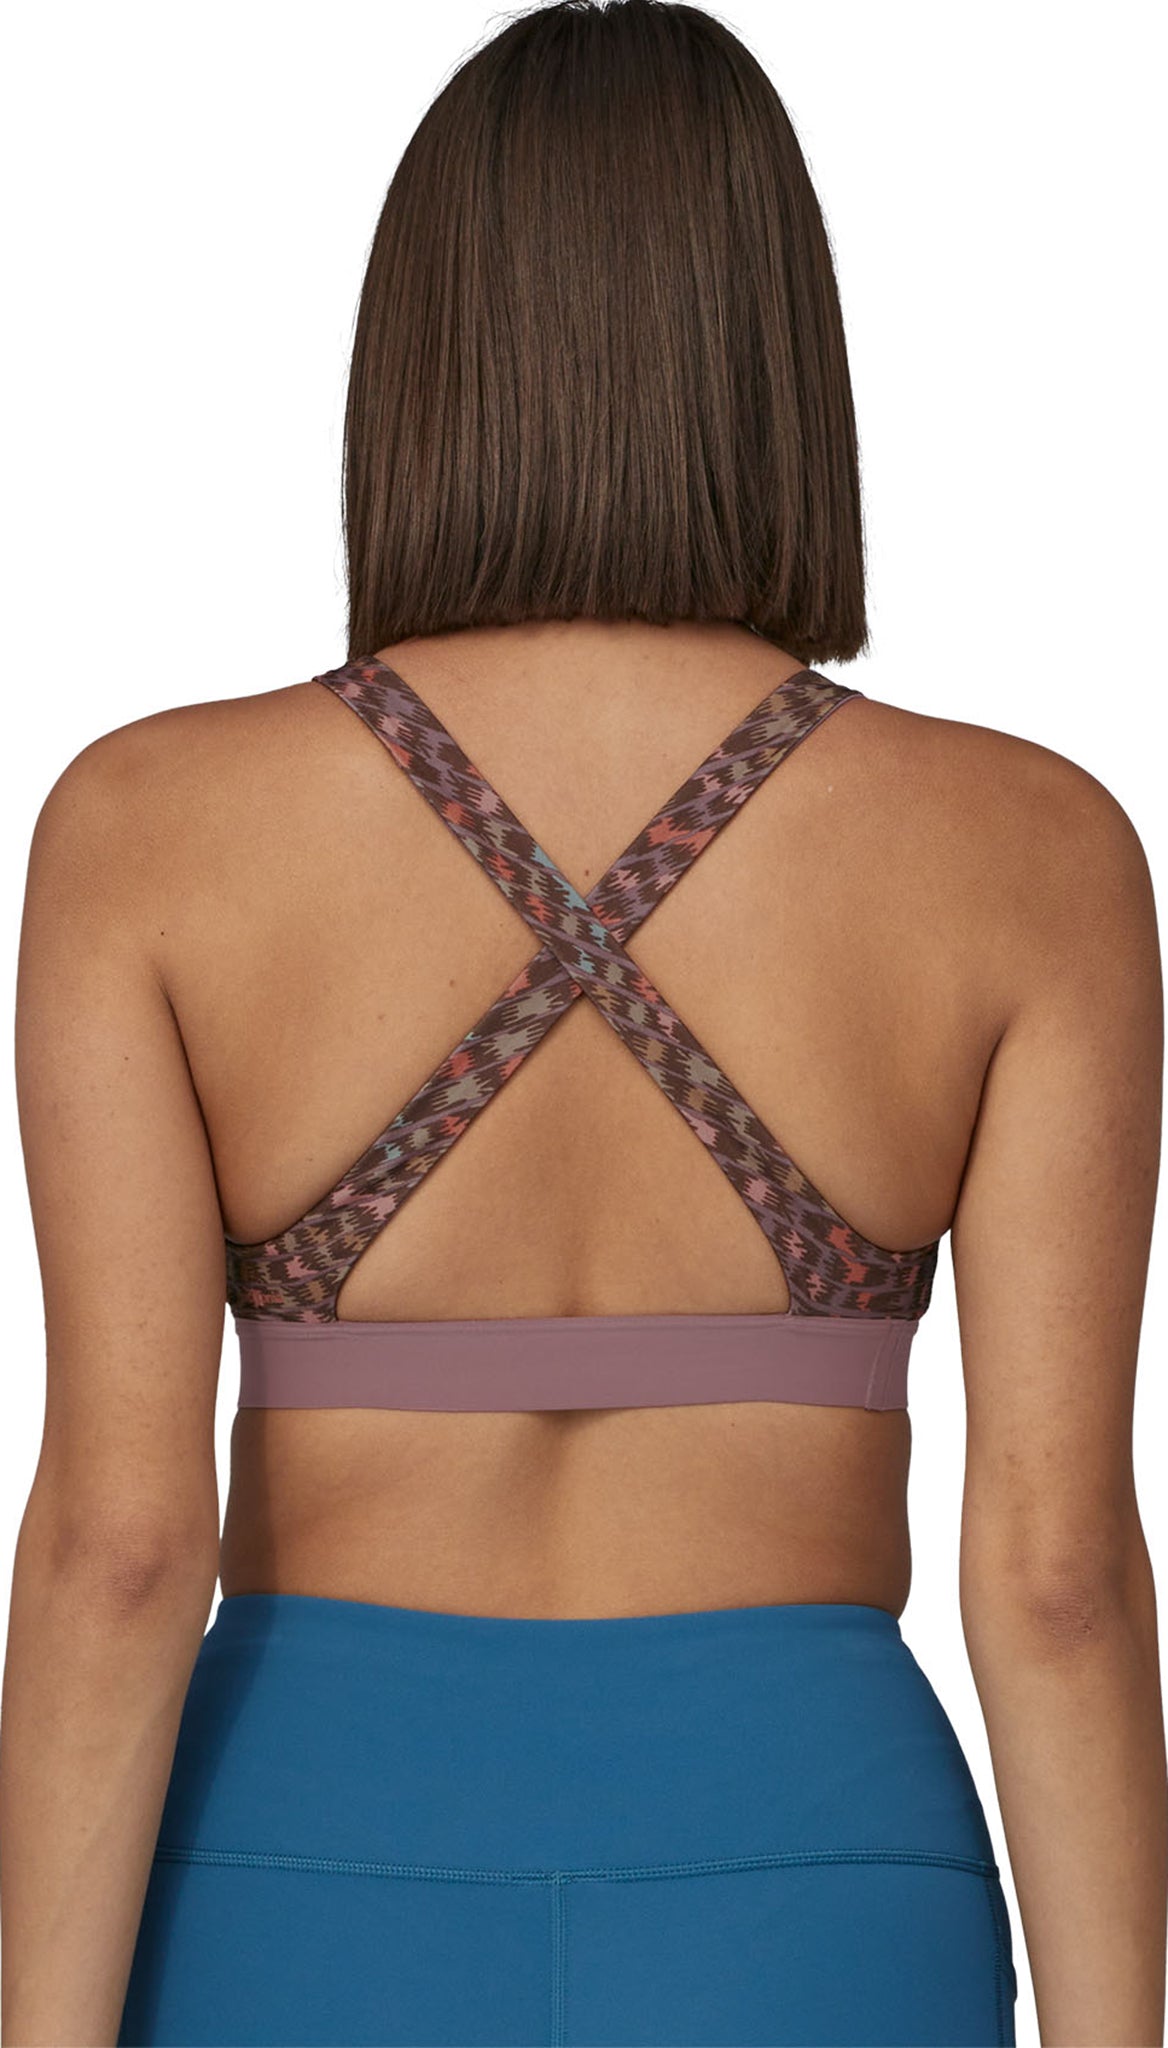 PATAGONIA-W'S SWITCHBACK SPORTS BRA INTERTWINED HANDS: EVENING MAUVE -  Trail running bra